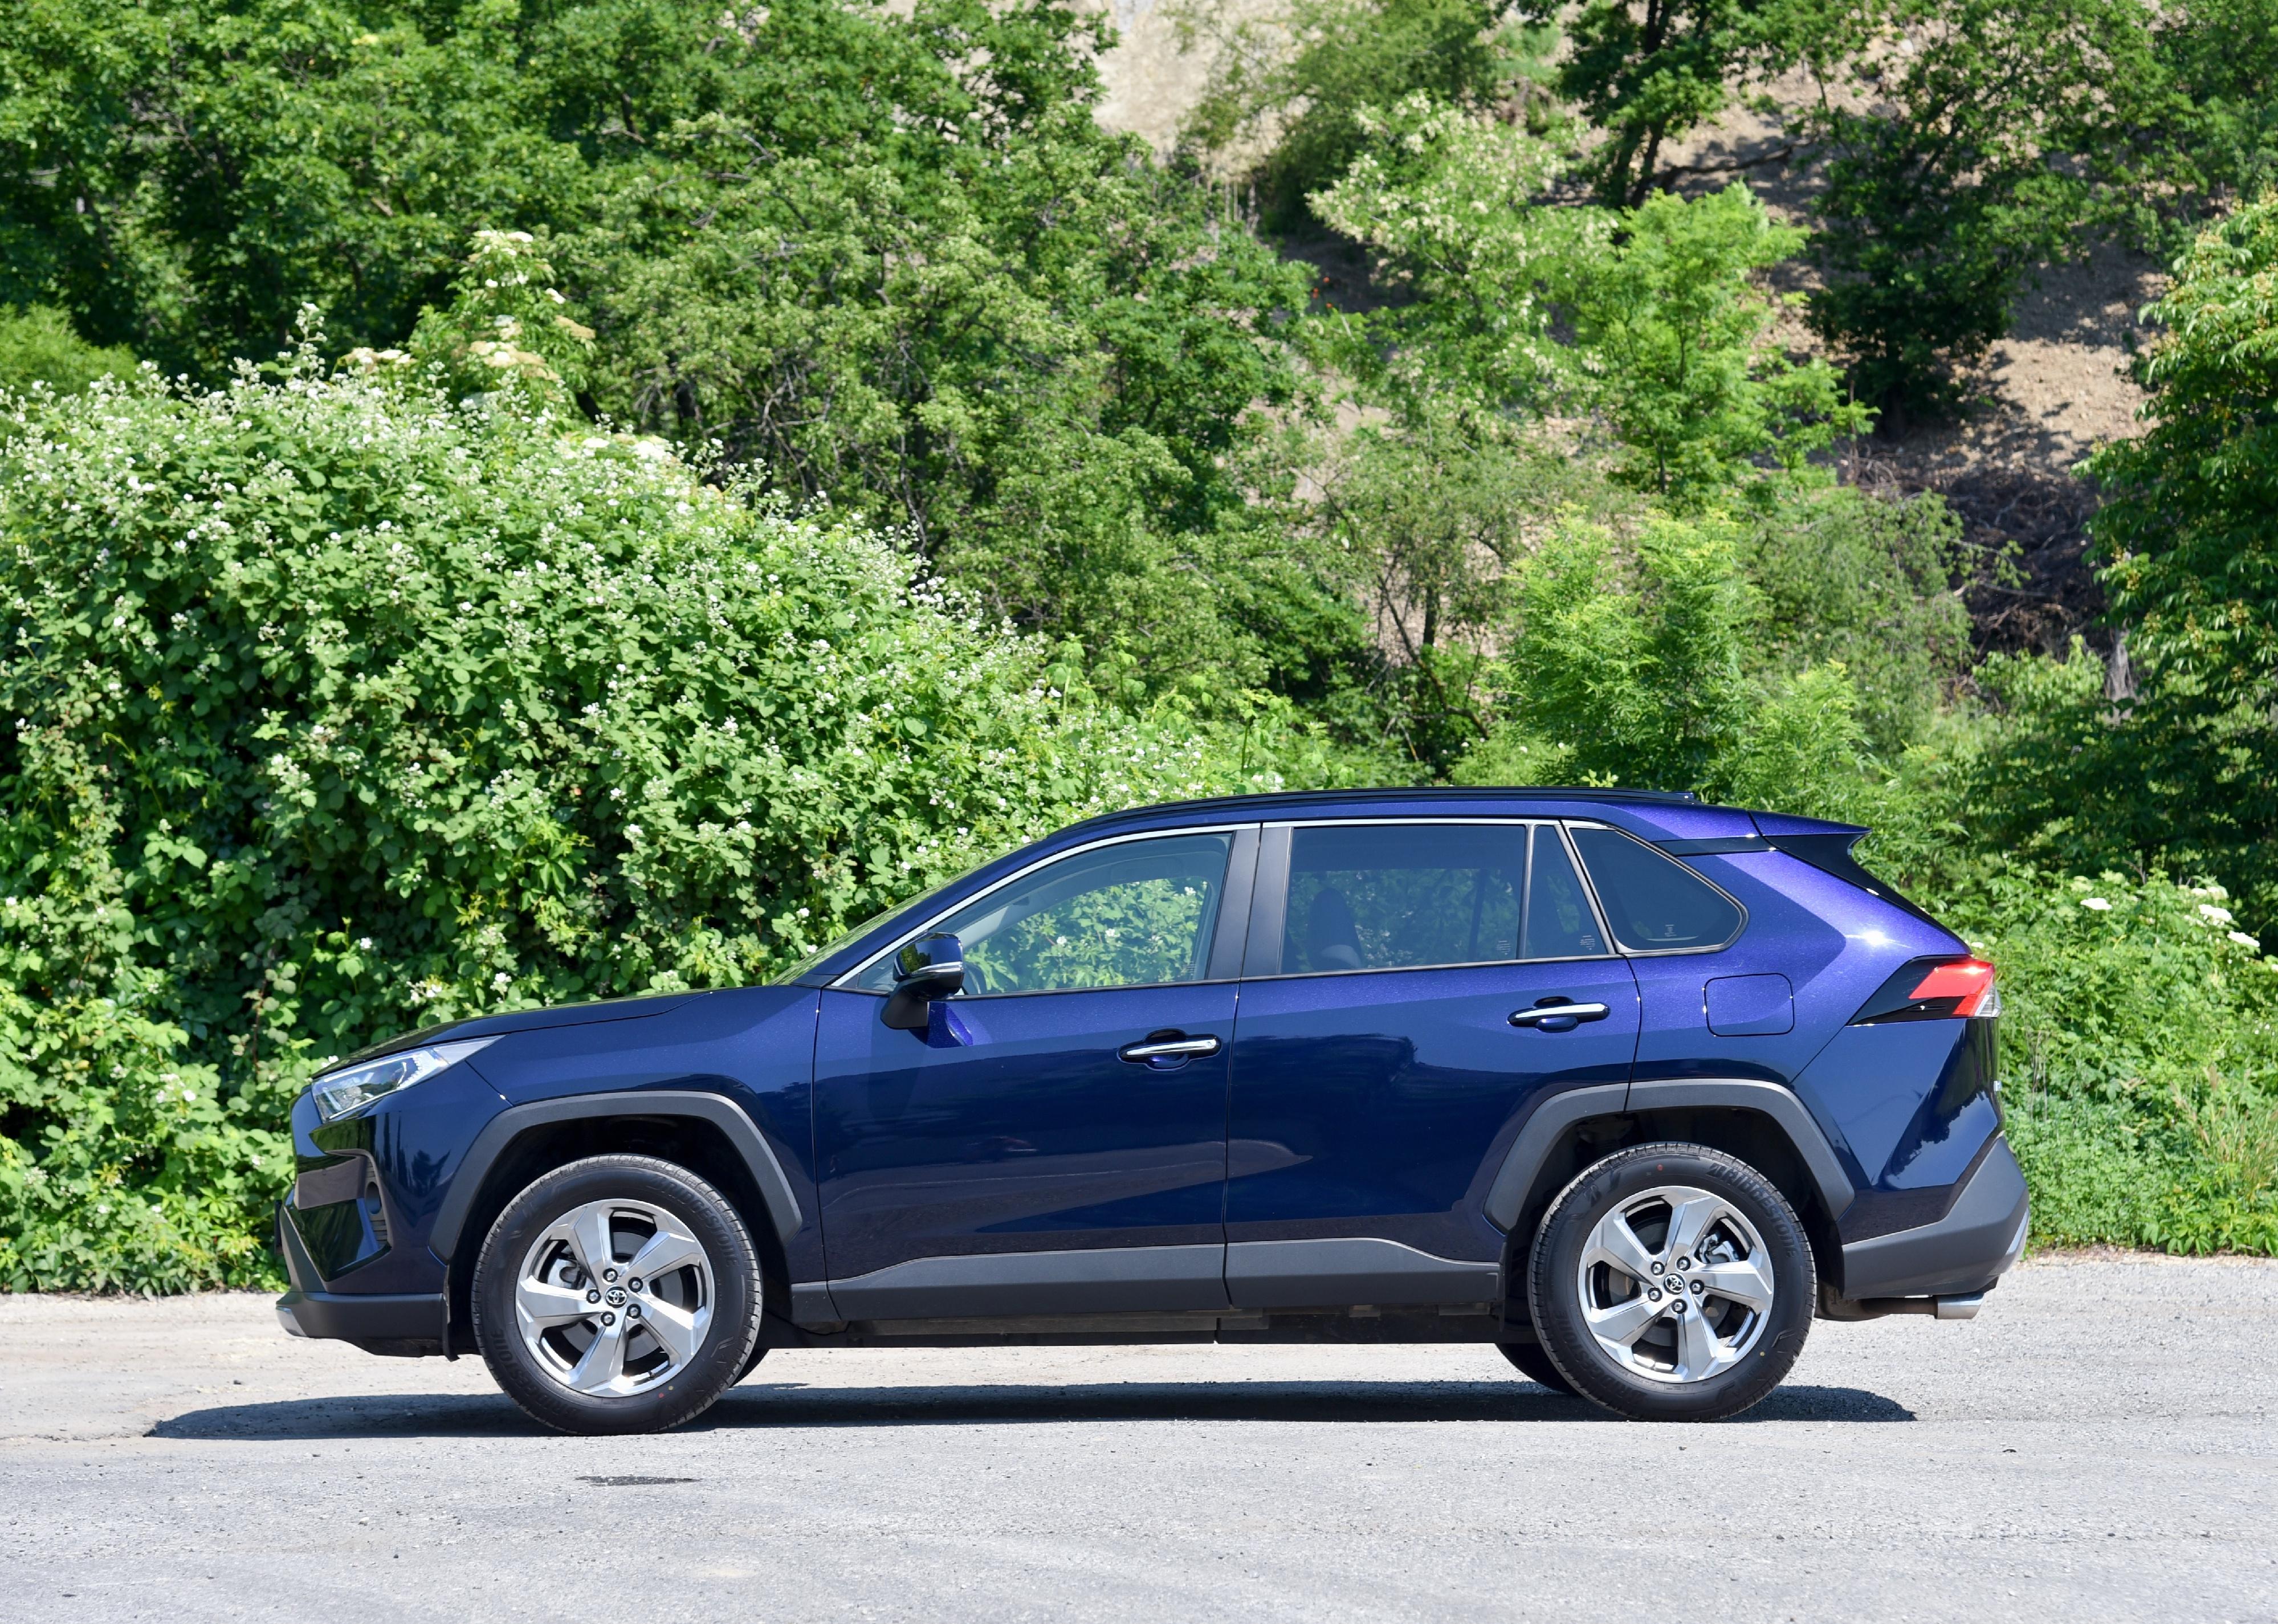 Side view of a Toyota RAV4.